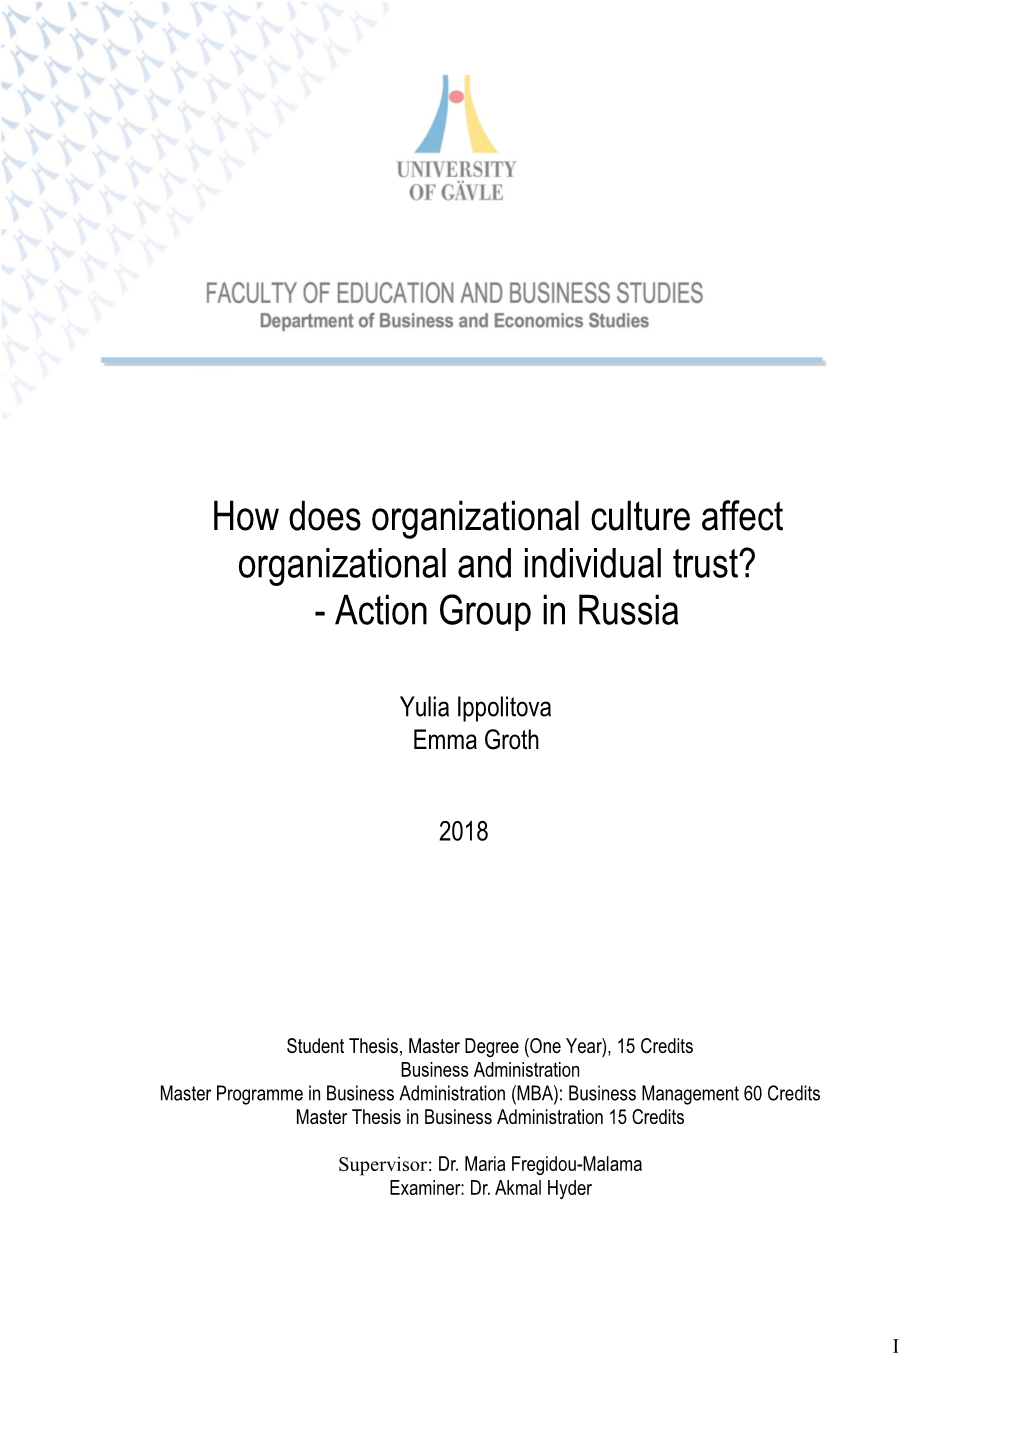 How Does Organizational Culture Affect Organizational and Individual Trust? - Action Group in Russia